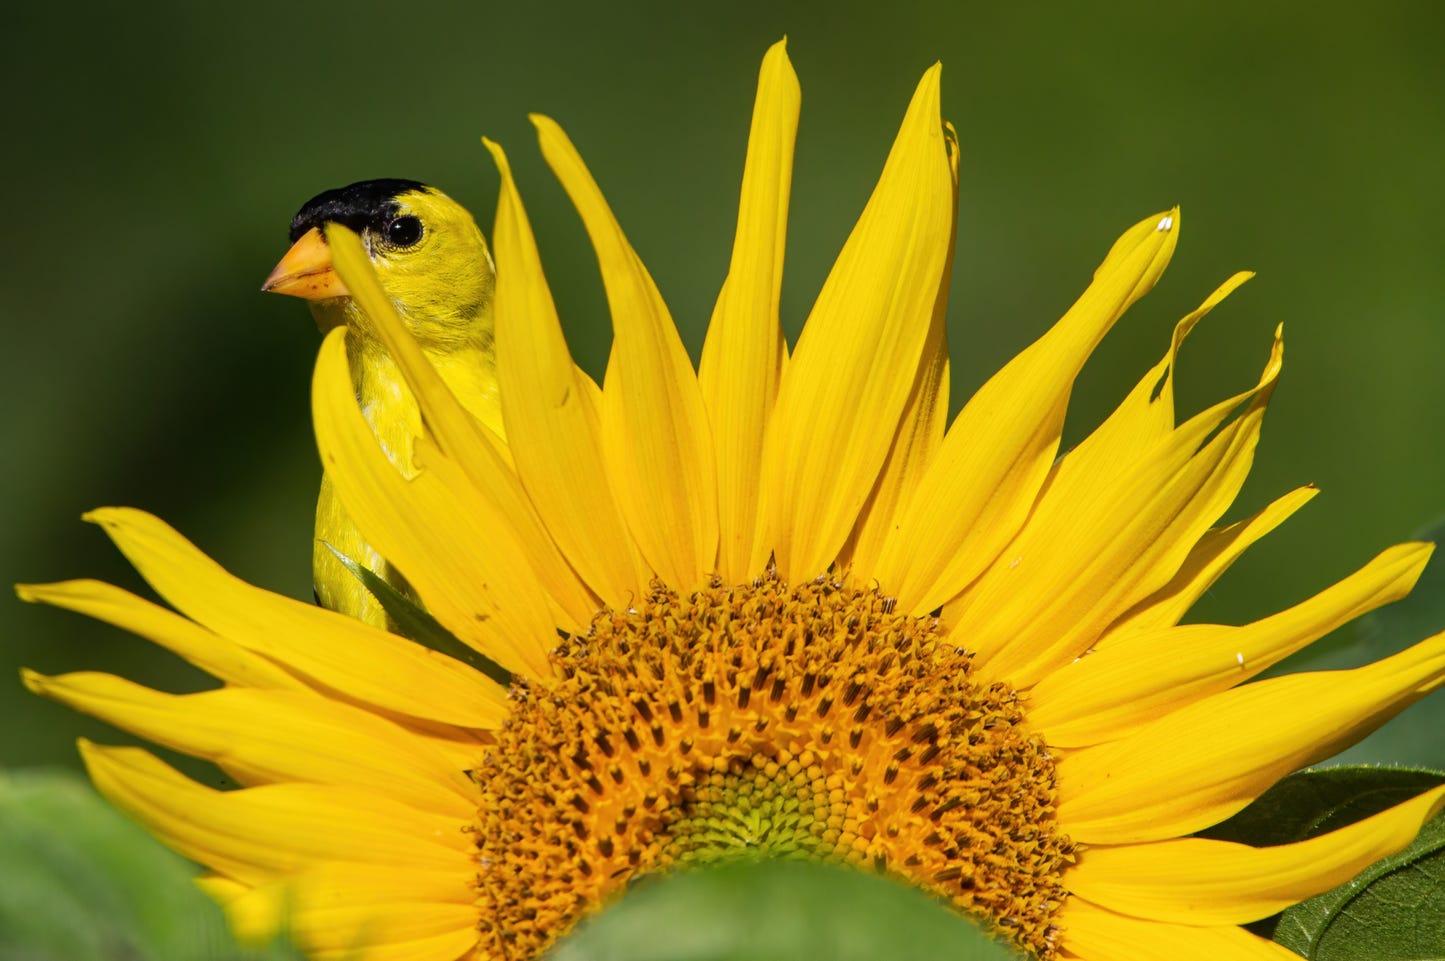 In this photo, a bright yellow and black goldfinch is behind a large sunflower head, peering out toward the photographer.